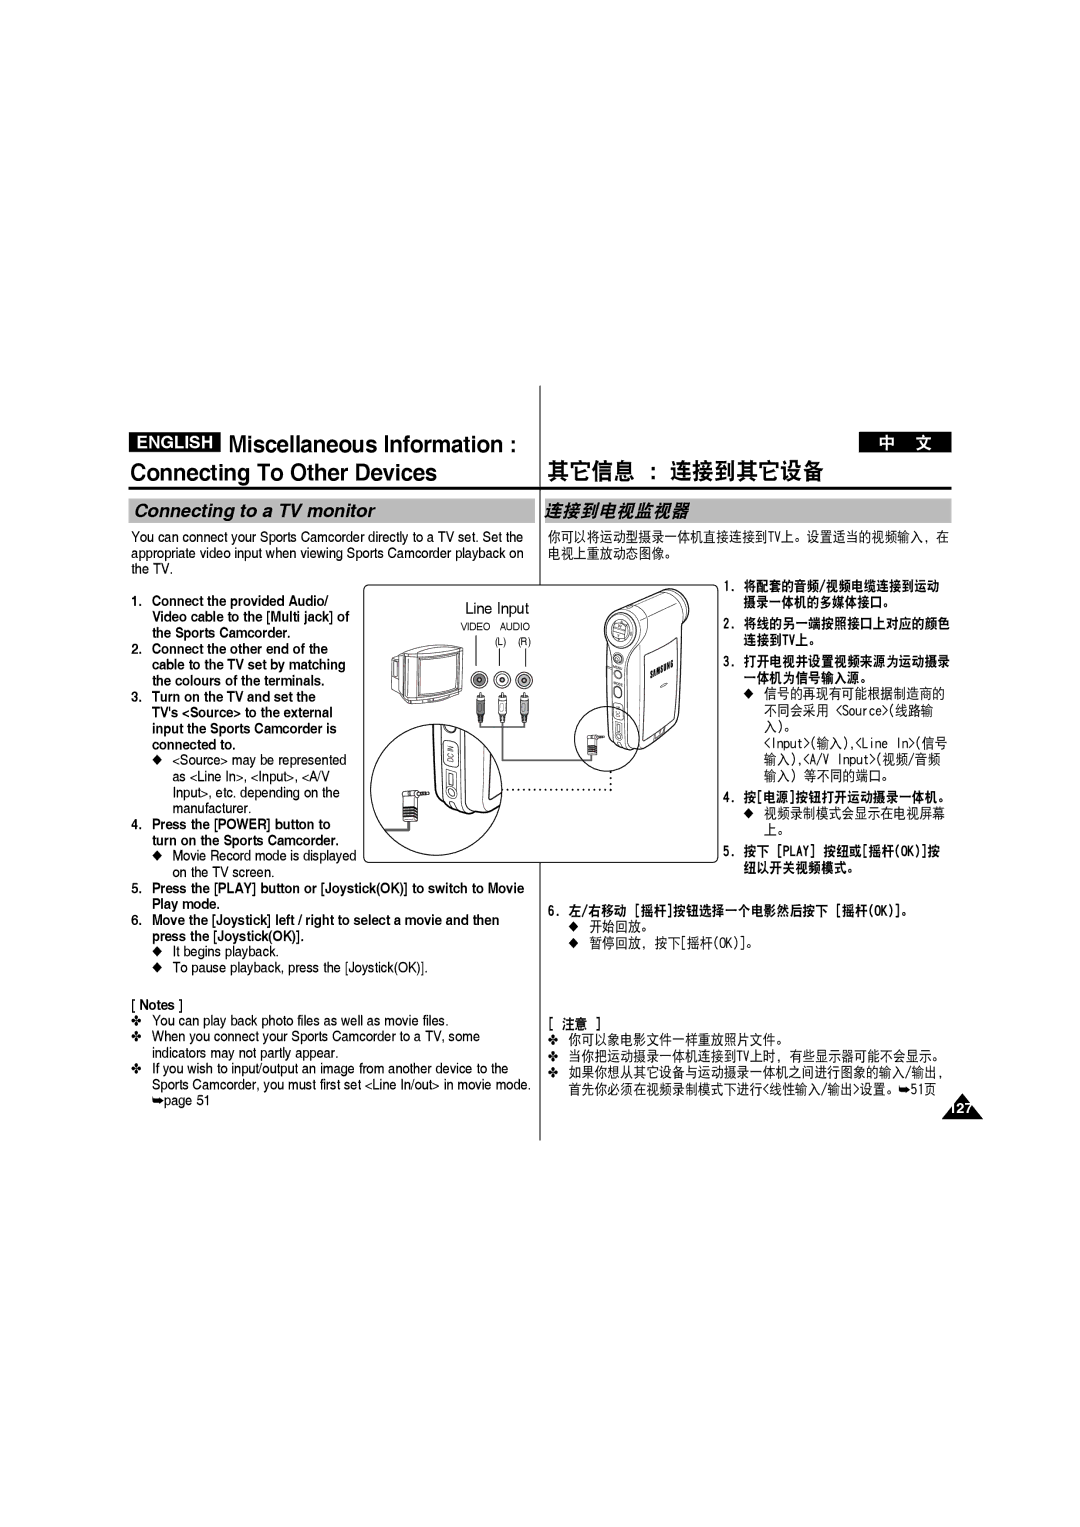 Samsung VP-X220L/XEF, VP-X210L/XEF, VP-X210L/XET, VP-X220L/XET, VP-X210L/MEA manual Connecting to a TV monitor, 连接到电视监视器 